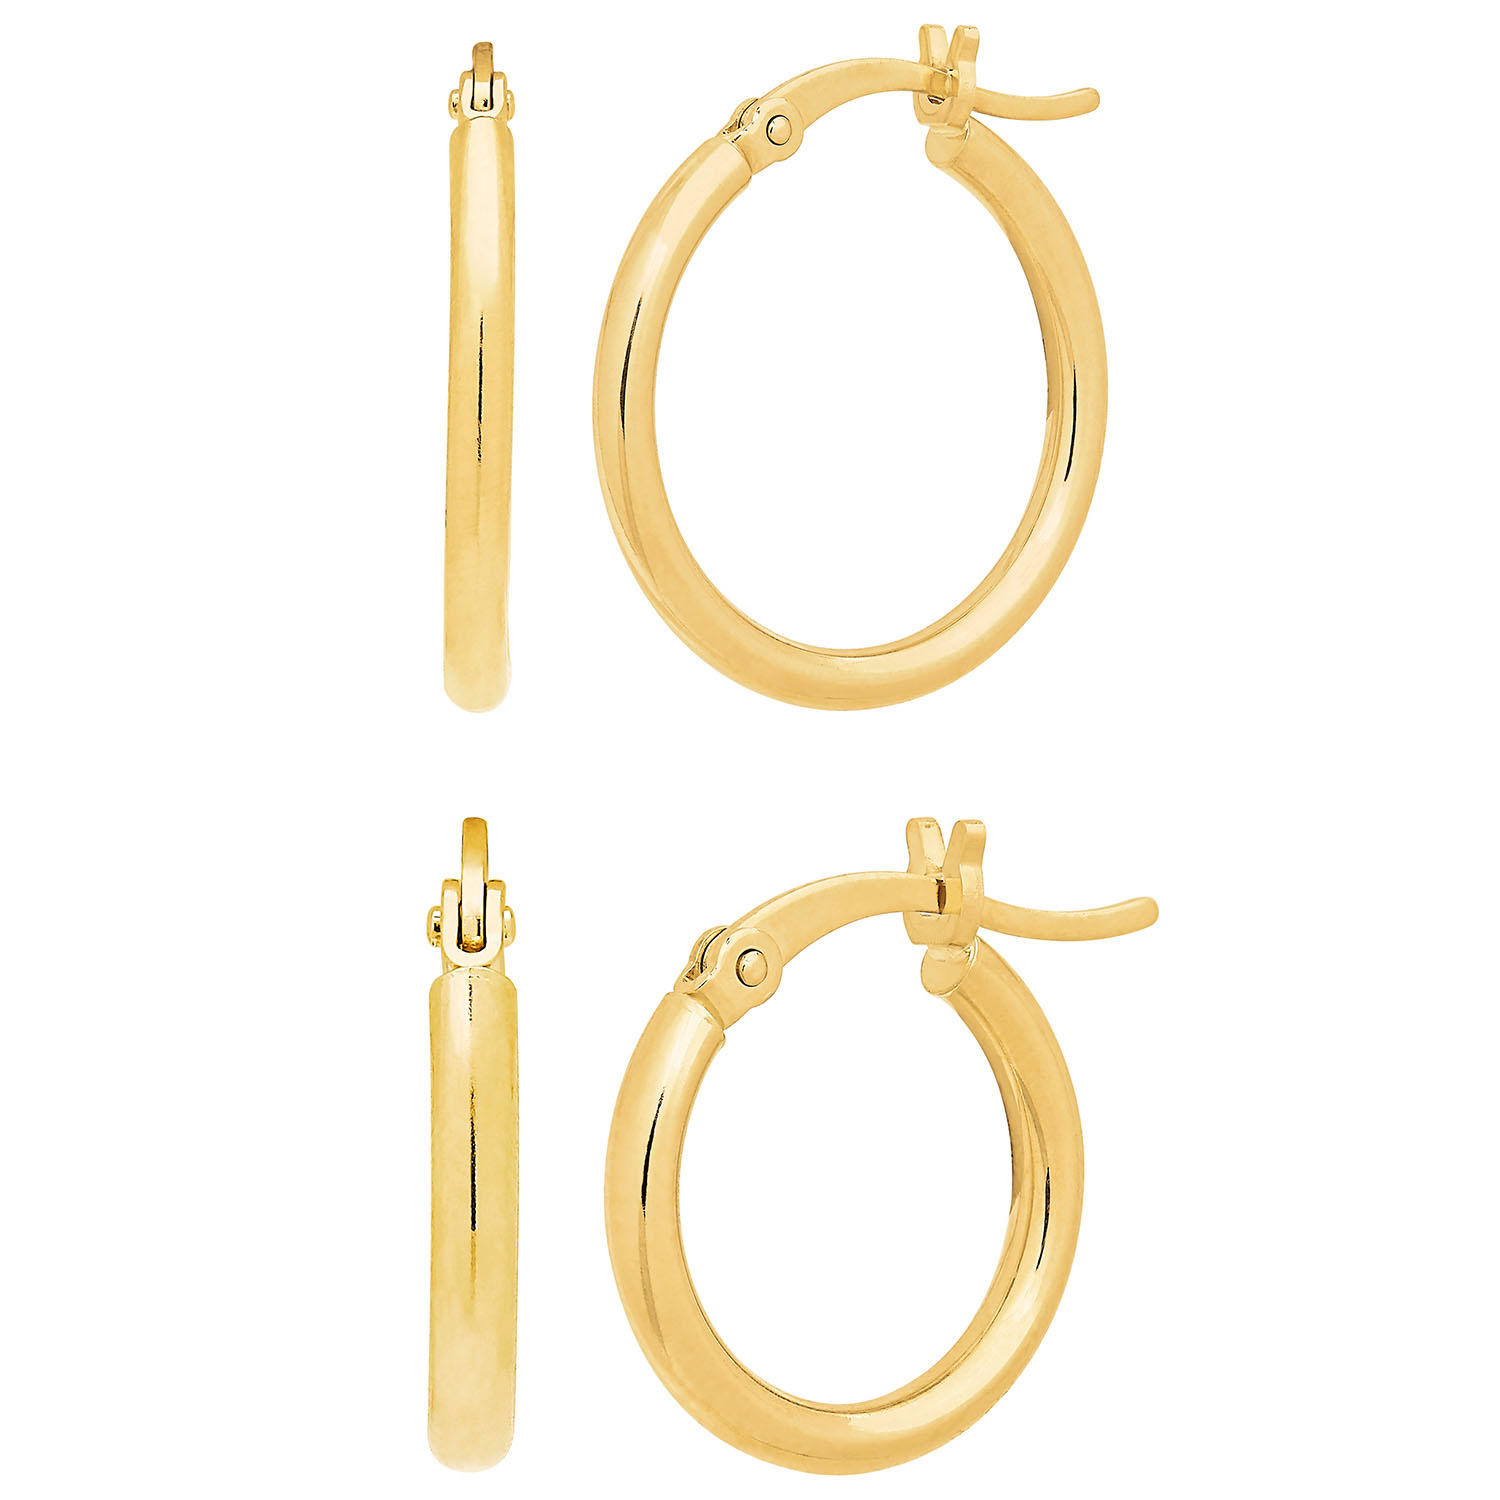 A pair of 14K gold polished earrings